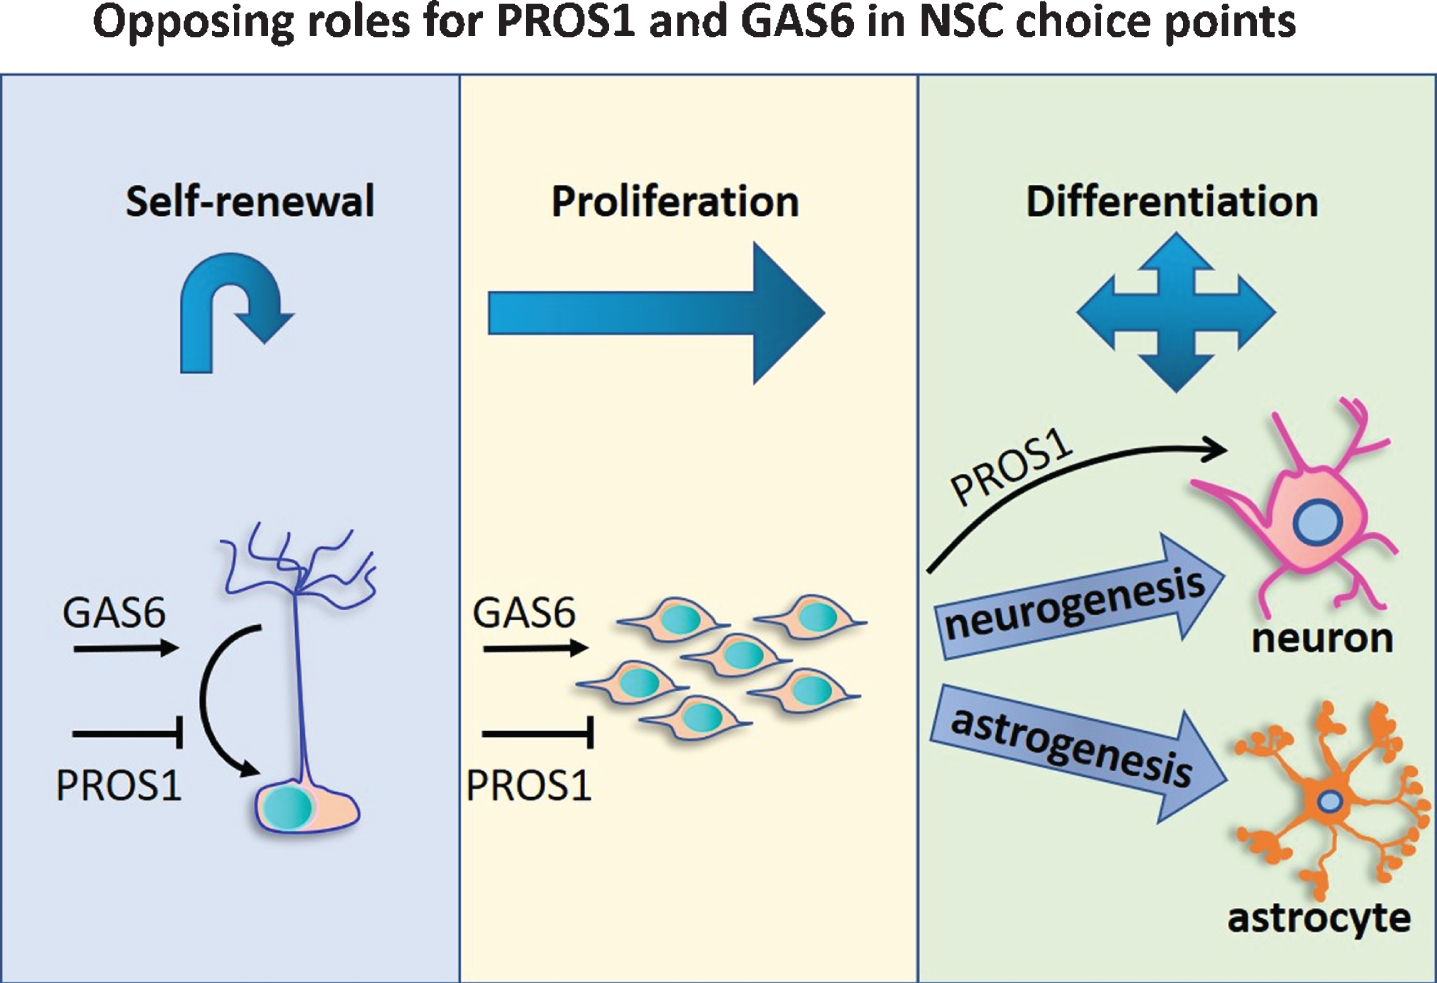 Opposing roles for PROS1 and GAS6 in NSC choice points. Different roles for the TAM agonists PROS1 and Gas6 were revealed through their genetic deletion. Opposing effects are seen on NSC self-renewal, where GAS6 deletion reduces the number of NSCs [40] but PROS1 deletion increased NSC self-renewal [24]. NSC “stemness” is maintained by PROS1, which inhibits NSC proliferation [25], but Gas6 promotes NSC proliferation [40]. PROS1 deletion led to an increase in astrogenesis, indicating its instructive role in the neurogenic fate lineage [25]. By contrast, Gas6 deletion had no effect on the cell fate of differentiated cells [40]. This delicate balance between Gas6 and PROS1 may contribute to NSC homeostasis and neurogenesis.